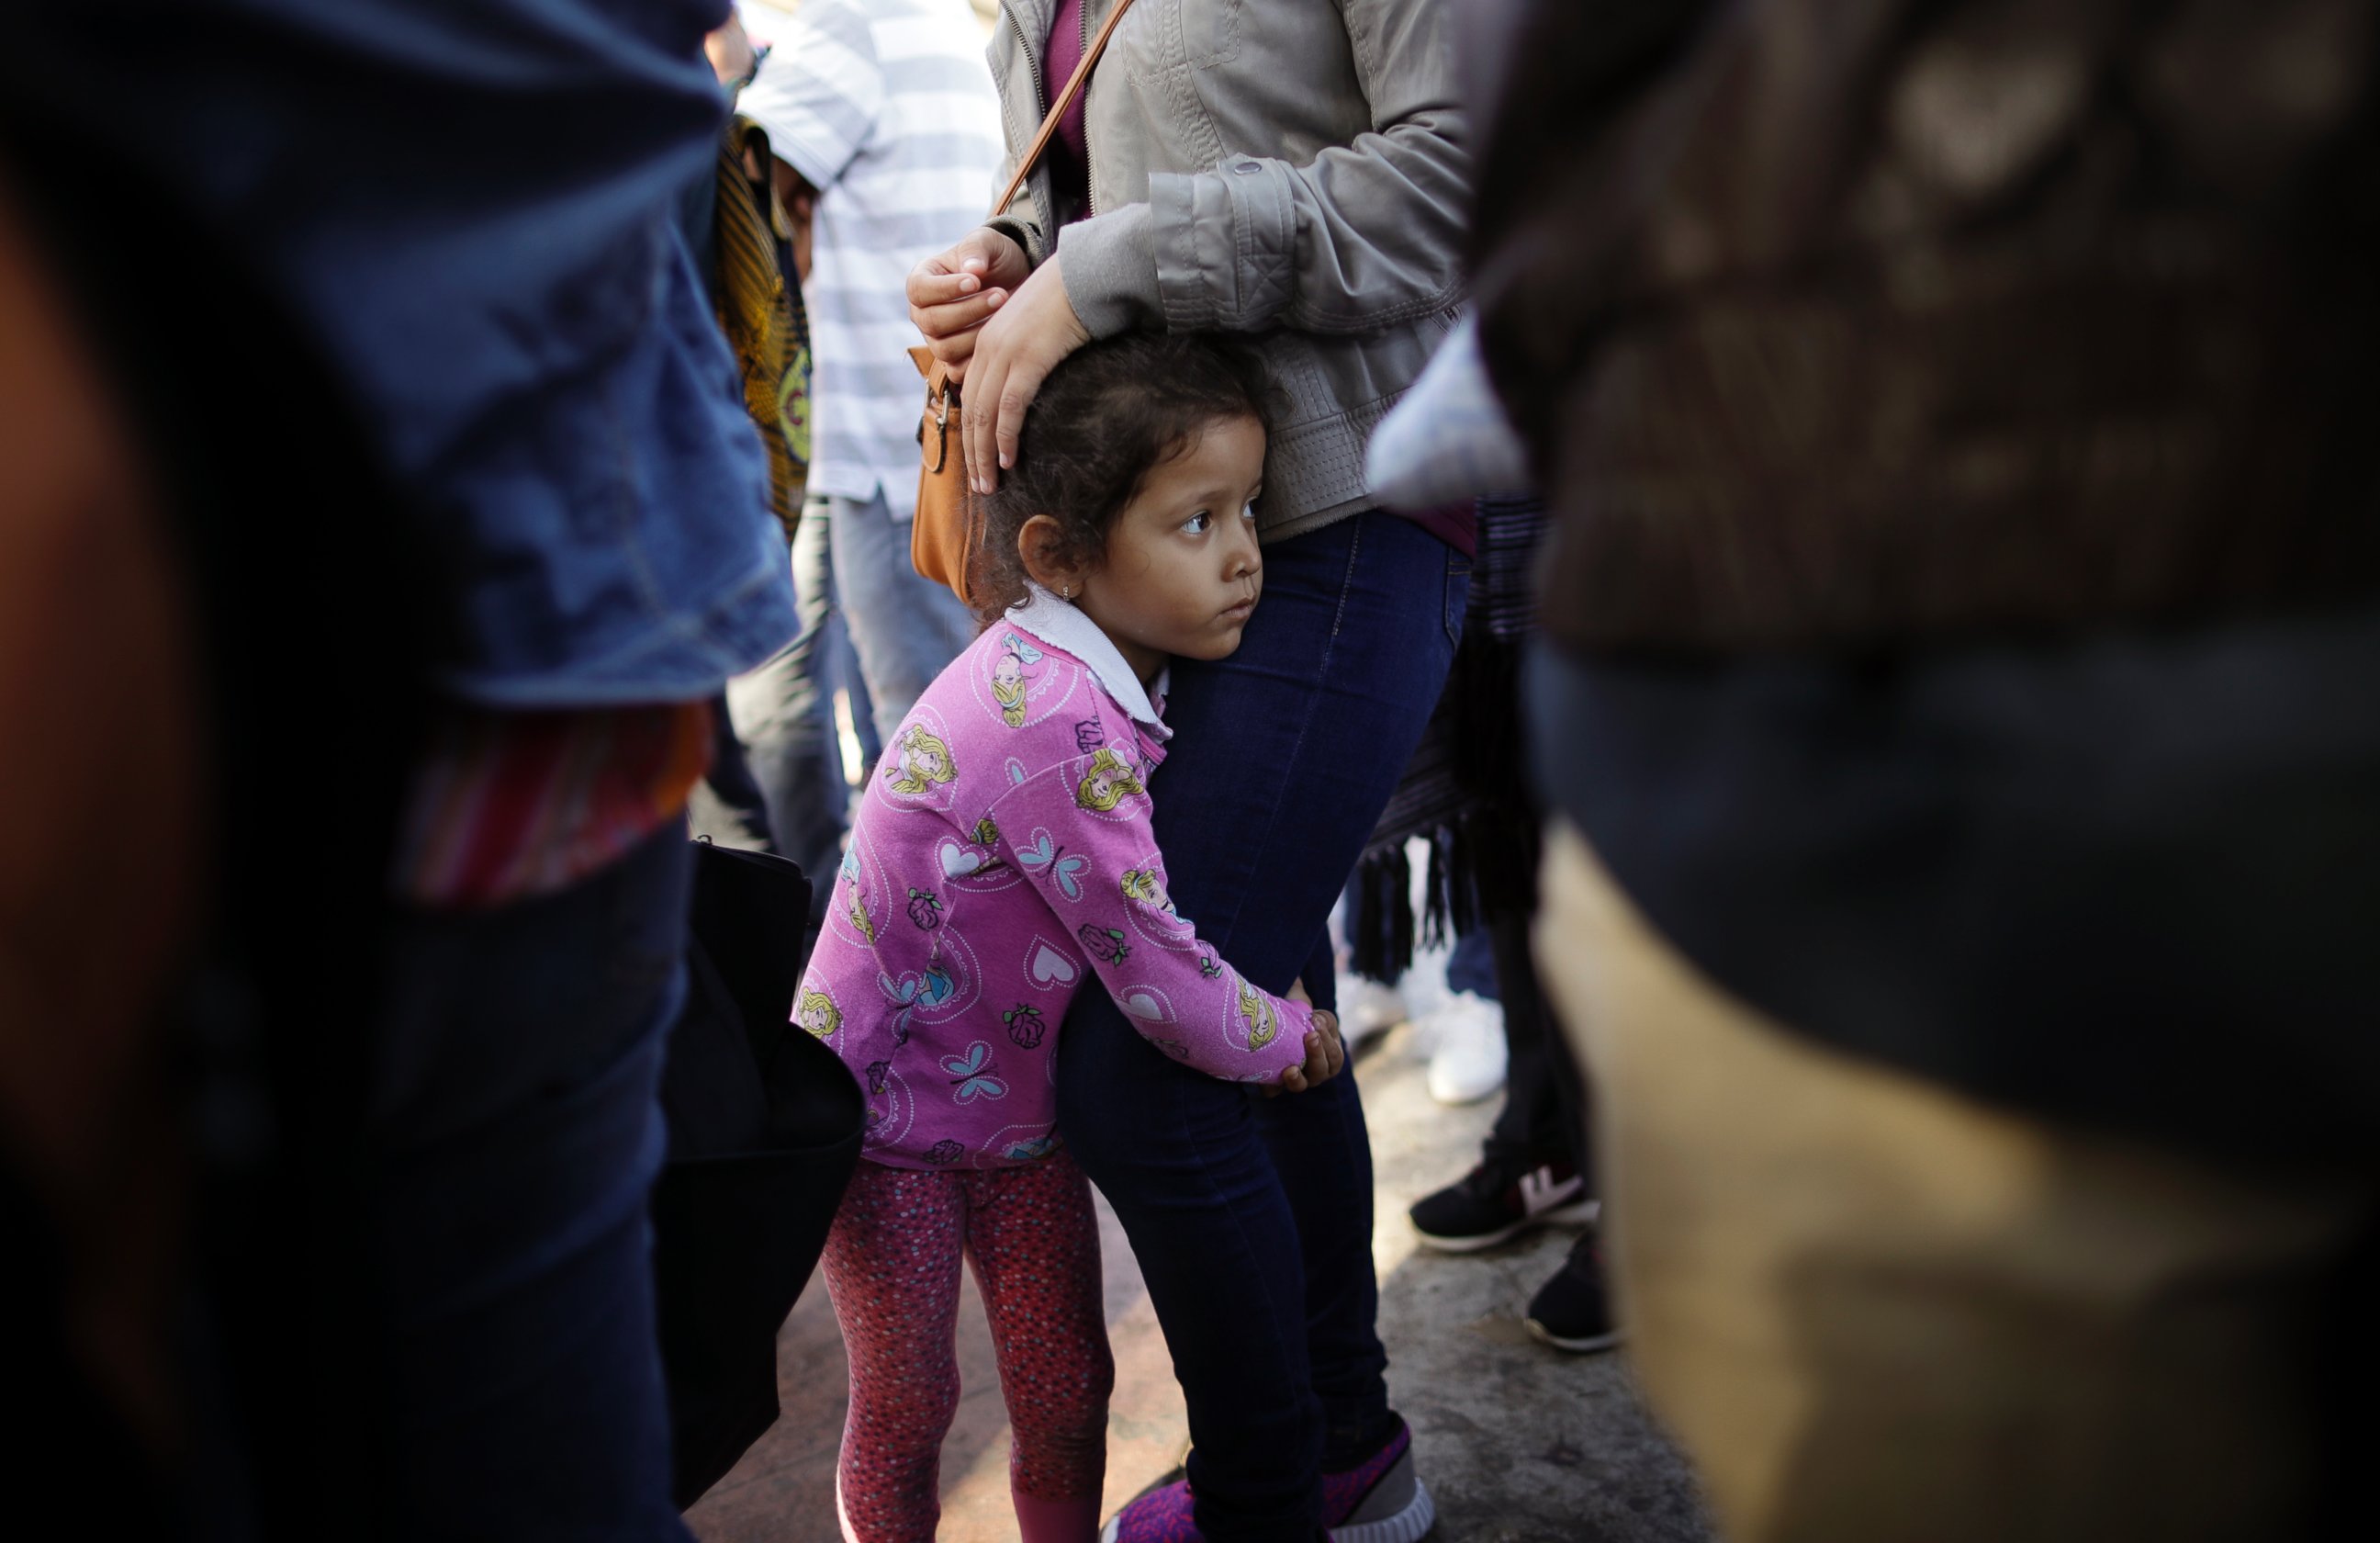 In this June 13, 2018 file photo, Nicole Hernandez, of the Mexican state of Guerrero, holds on to her mother as they wait with other families to request political asylum in the United States, across the border in Tijuana, Mexico.